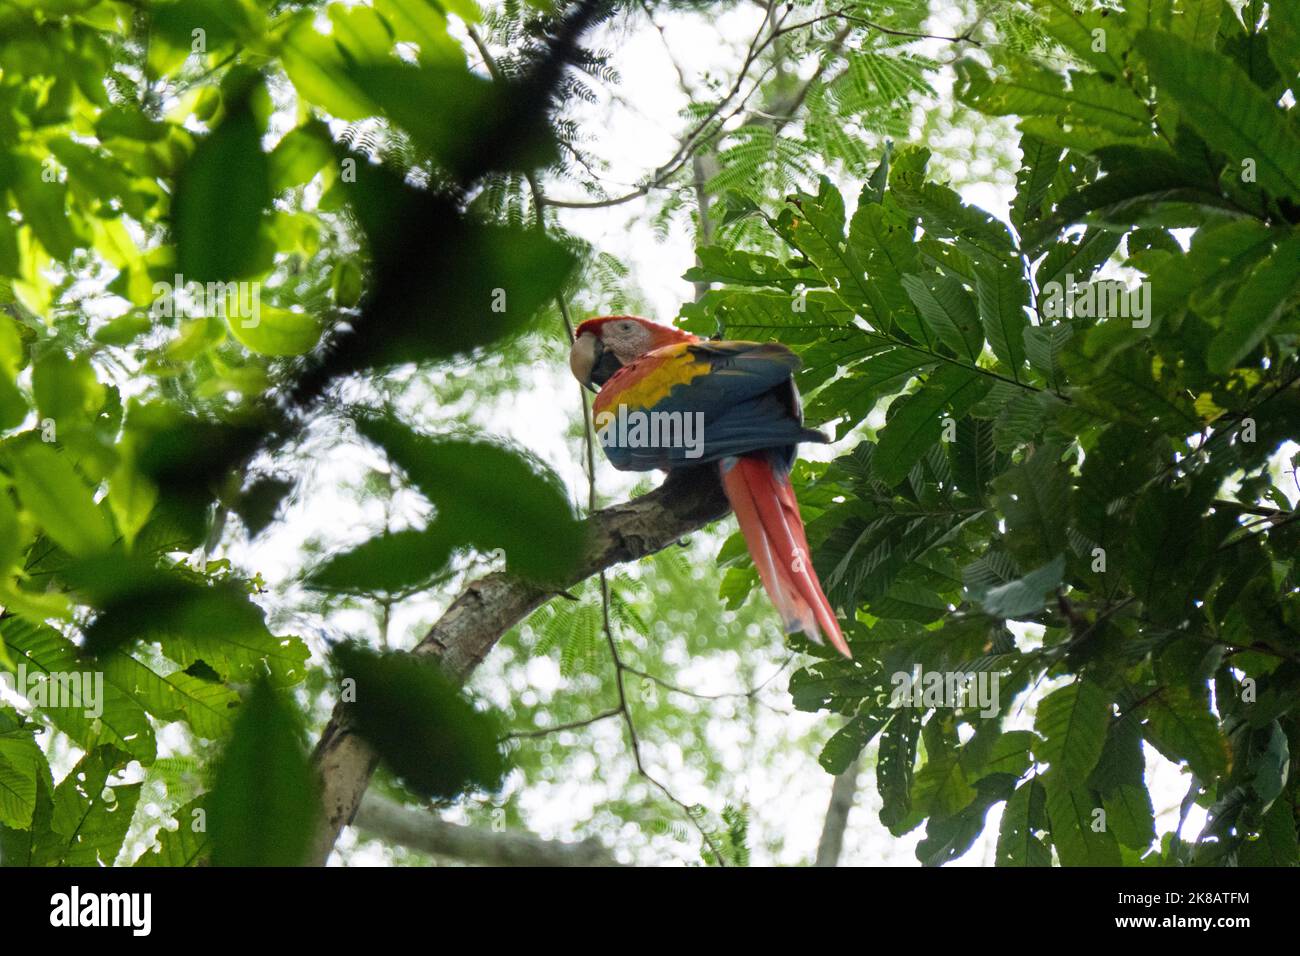 A scarlet macaw (Ara macao) perched on a tree branch in Chiapas, Mexico. Large red, yellow, and blue Central and South American parrot. Wild bird in r Stock Photo